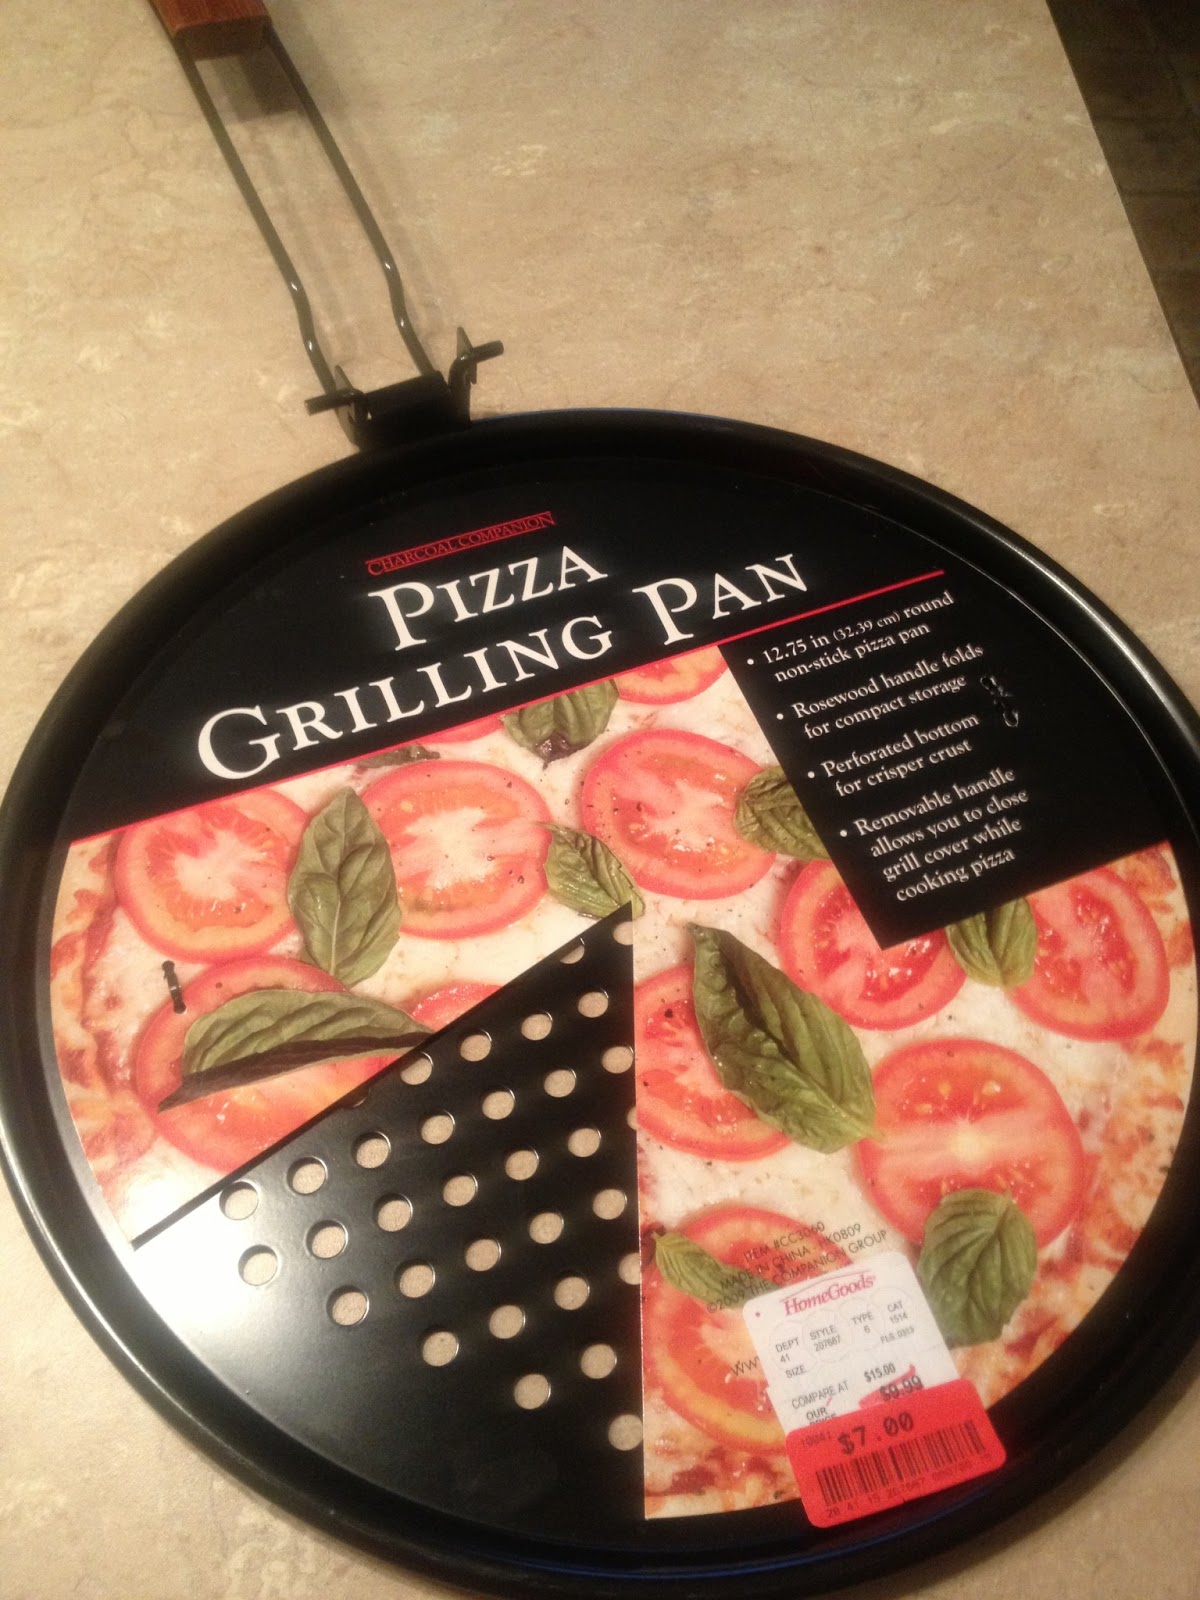 CC3060 Pizza Grill Pan - The Companion Group